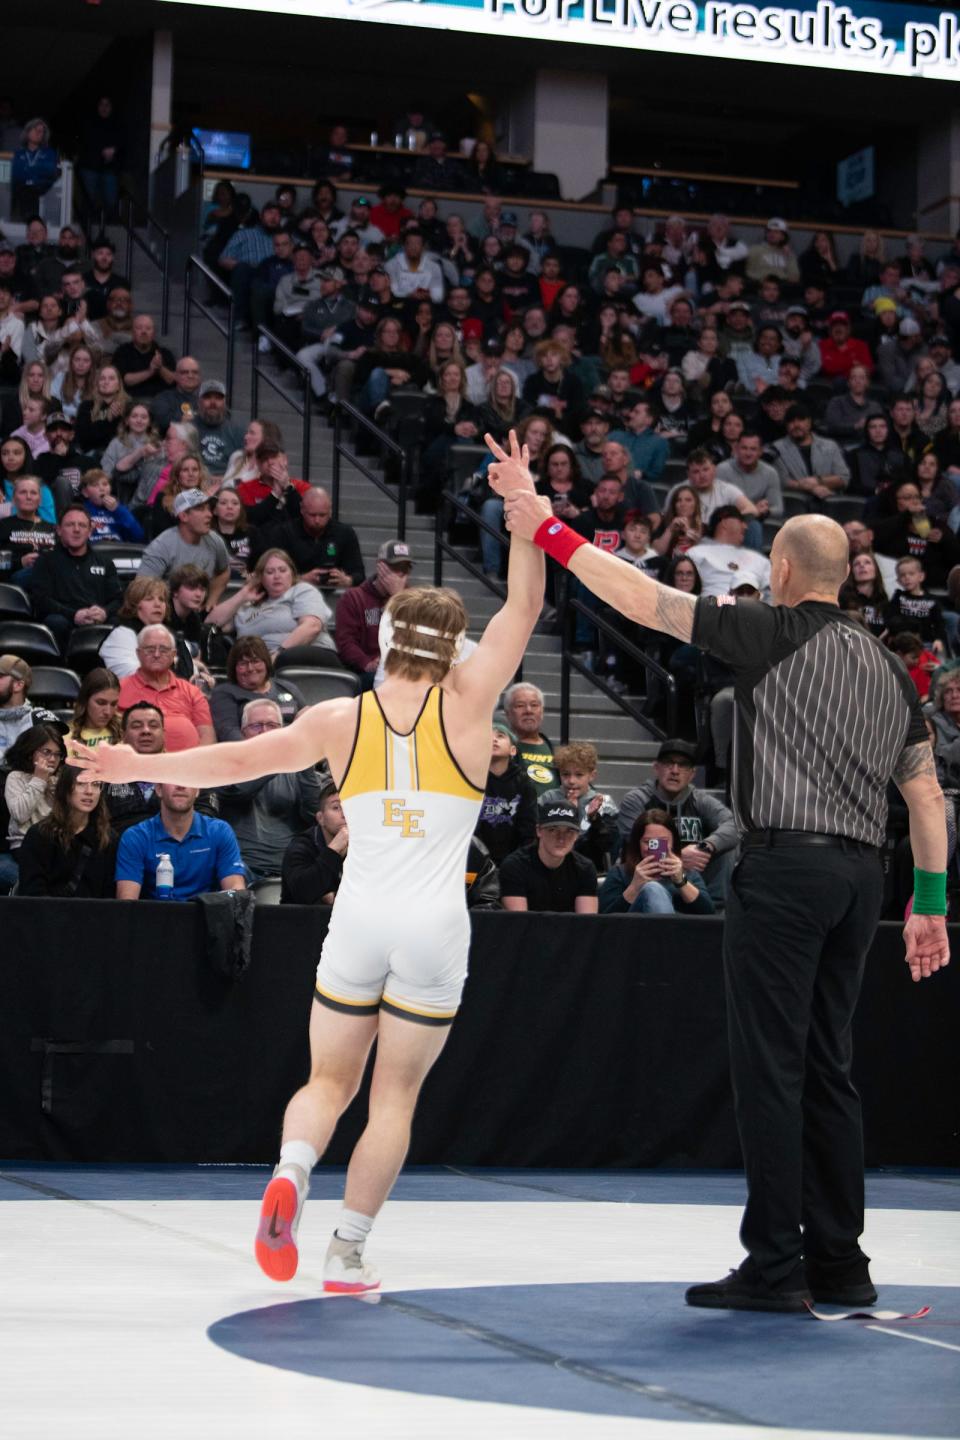 Pueblo East's Weston Dalton has his hand raised as the winner of the 150-pound championship match of the Class 4A state wrestling tournament at Ball Arena on Saturday.